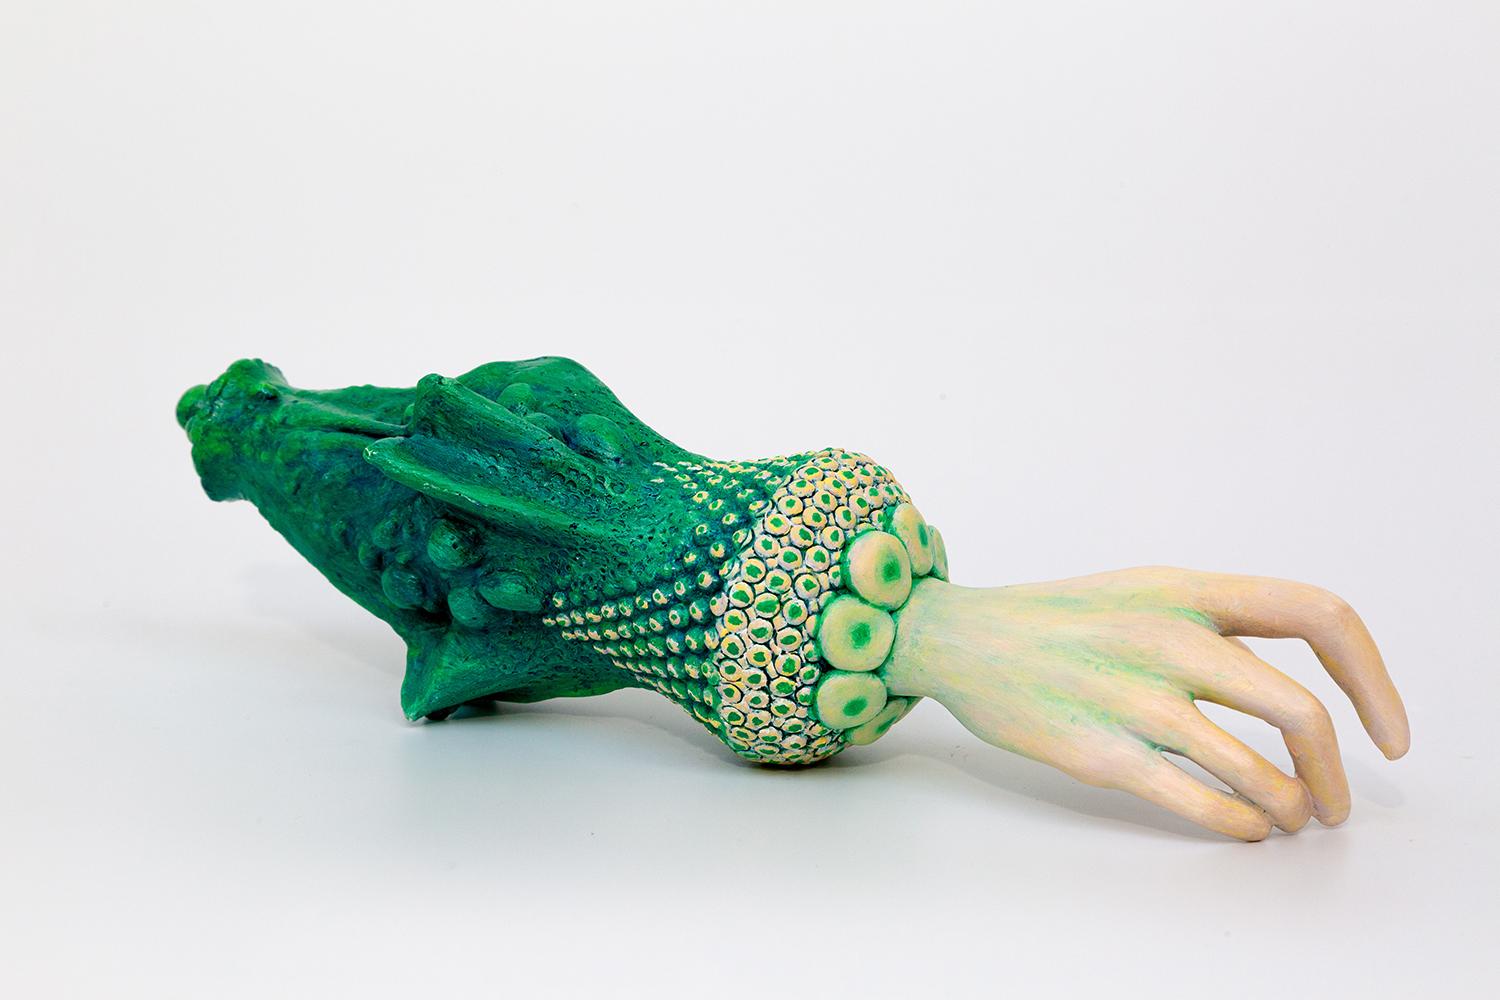 A 2023 recipient of the Vermont Governor’s Award for Excellence in the Arts,

Leslie Fry is represented in this show with fantastical sculptures of female hands, titled the “Cuffed” series.   Tensely poised and mannered gestures, inspired by